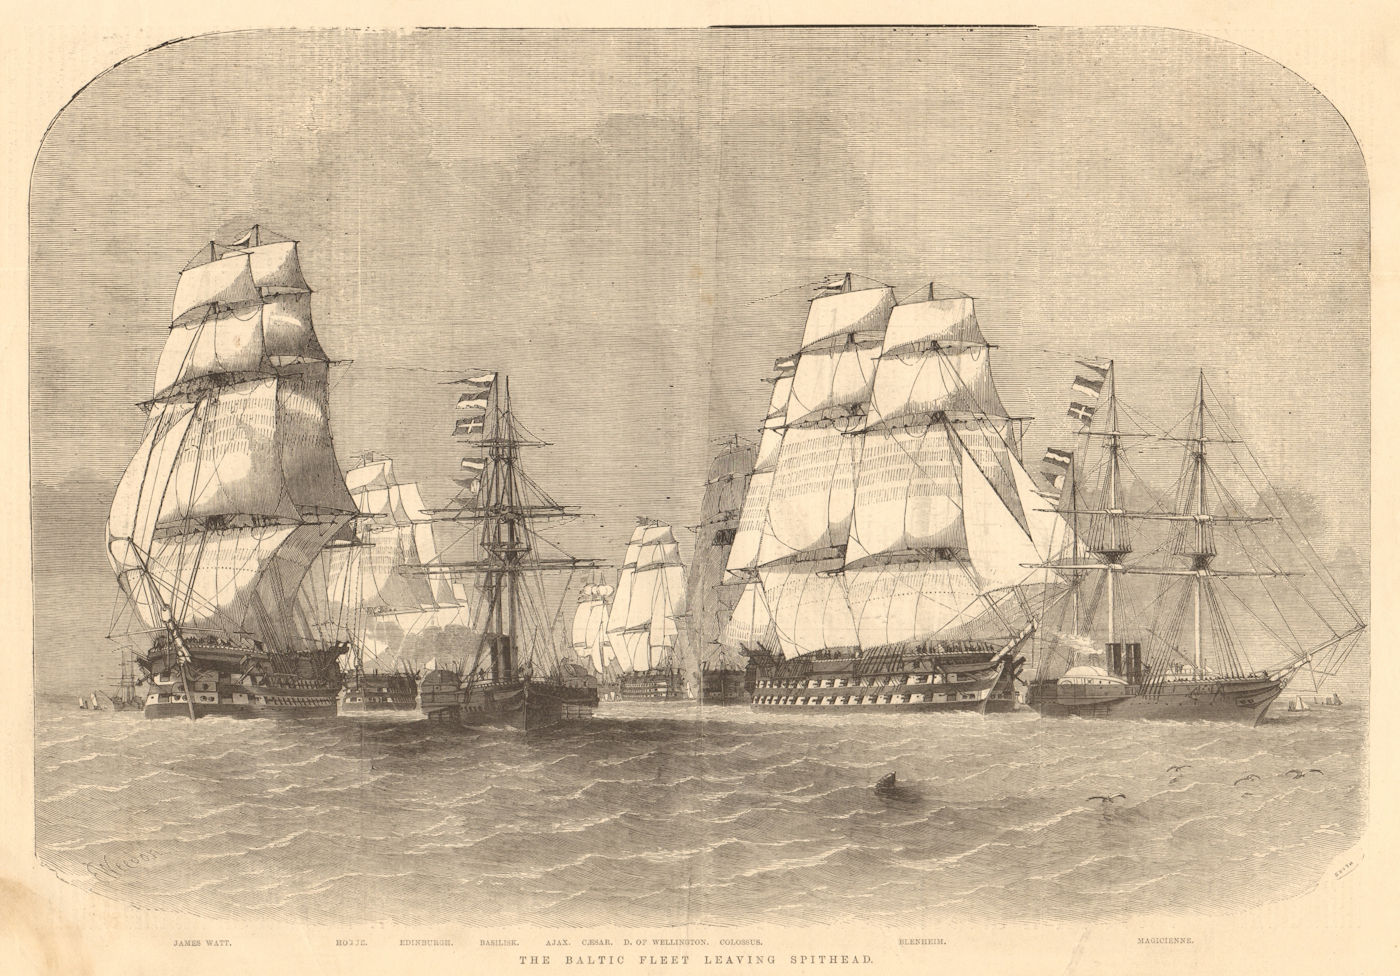 Associate Product The Baltic Fleet leaving Spithead. Hampshire. Ships 1855 old antique print